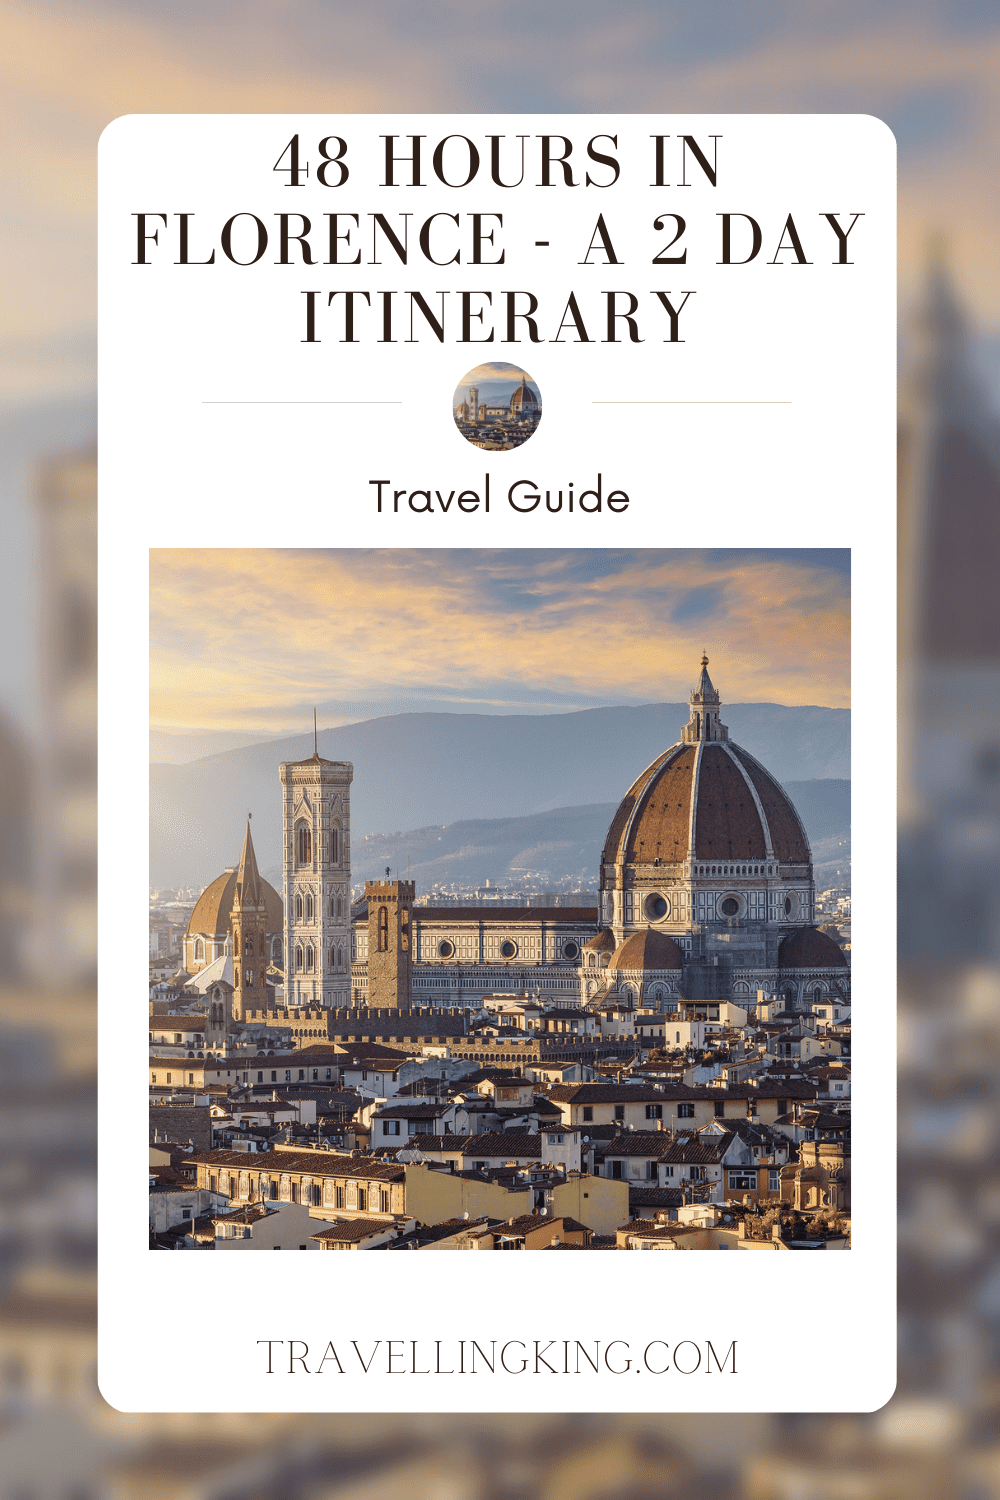 48 hours in Florence - A 2 day Itinerary